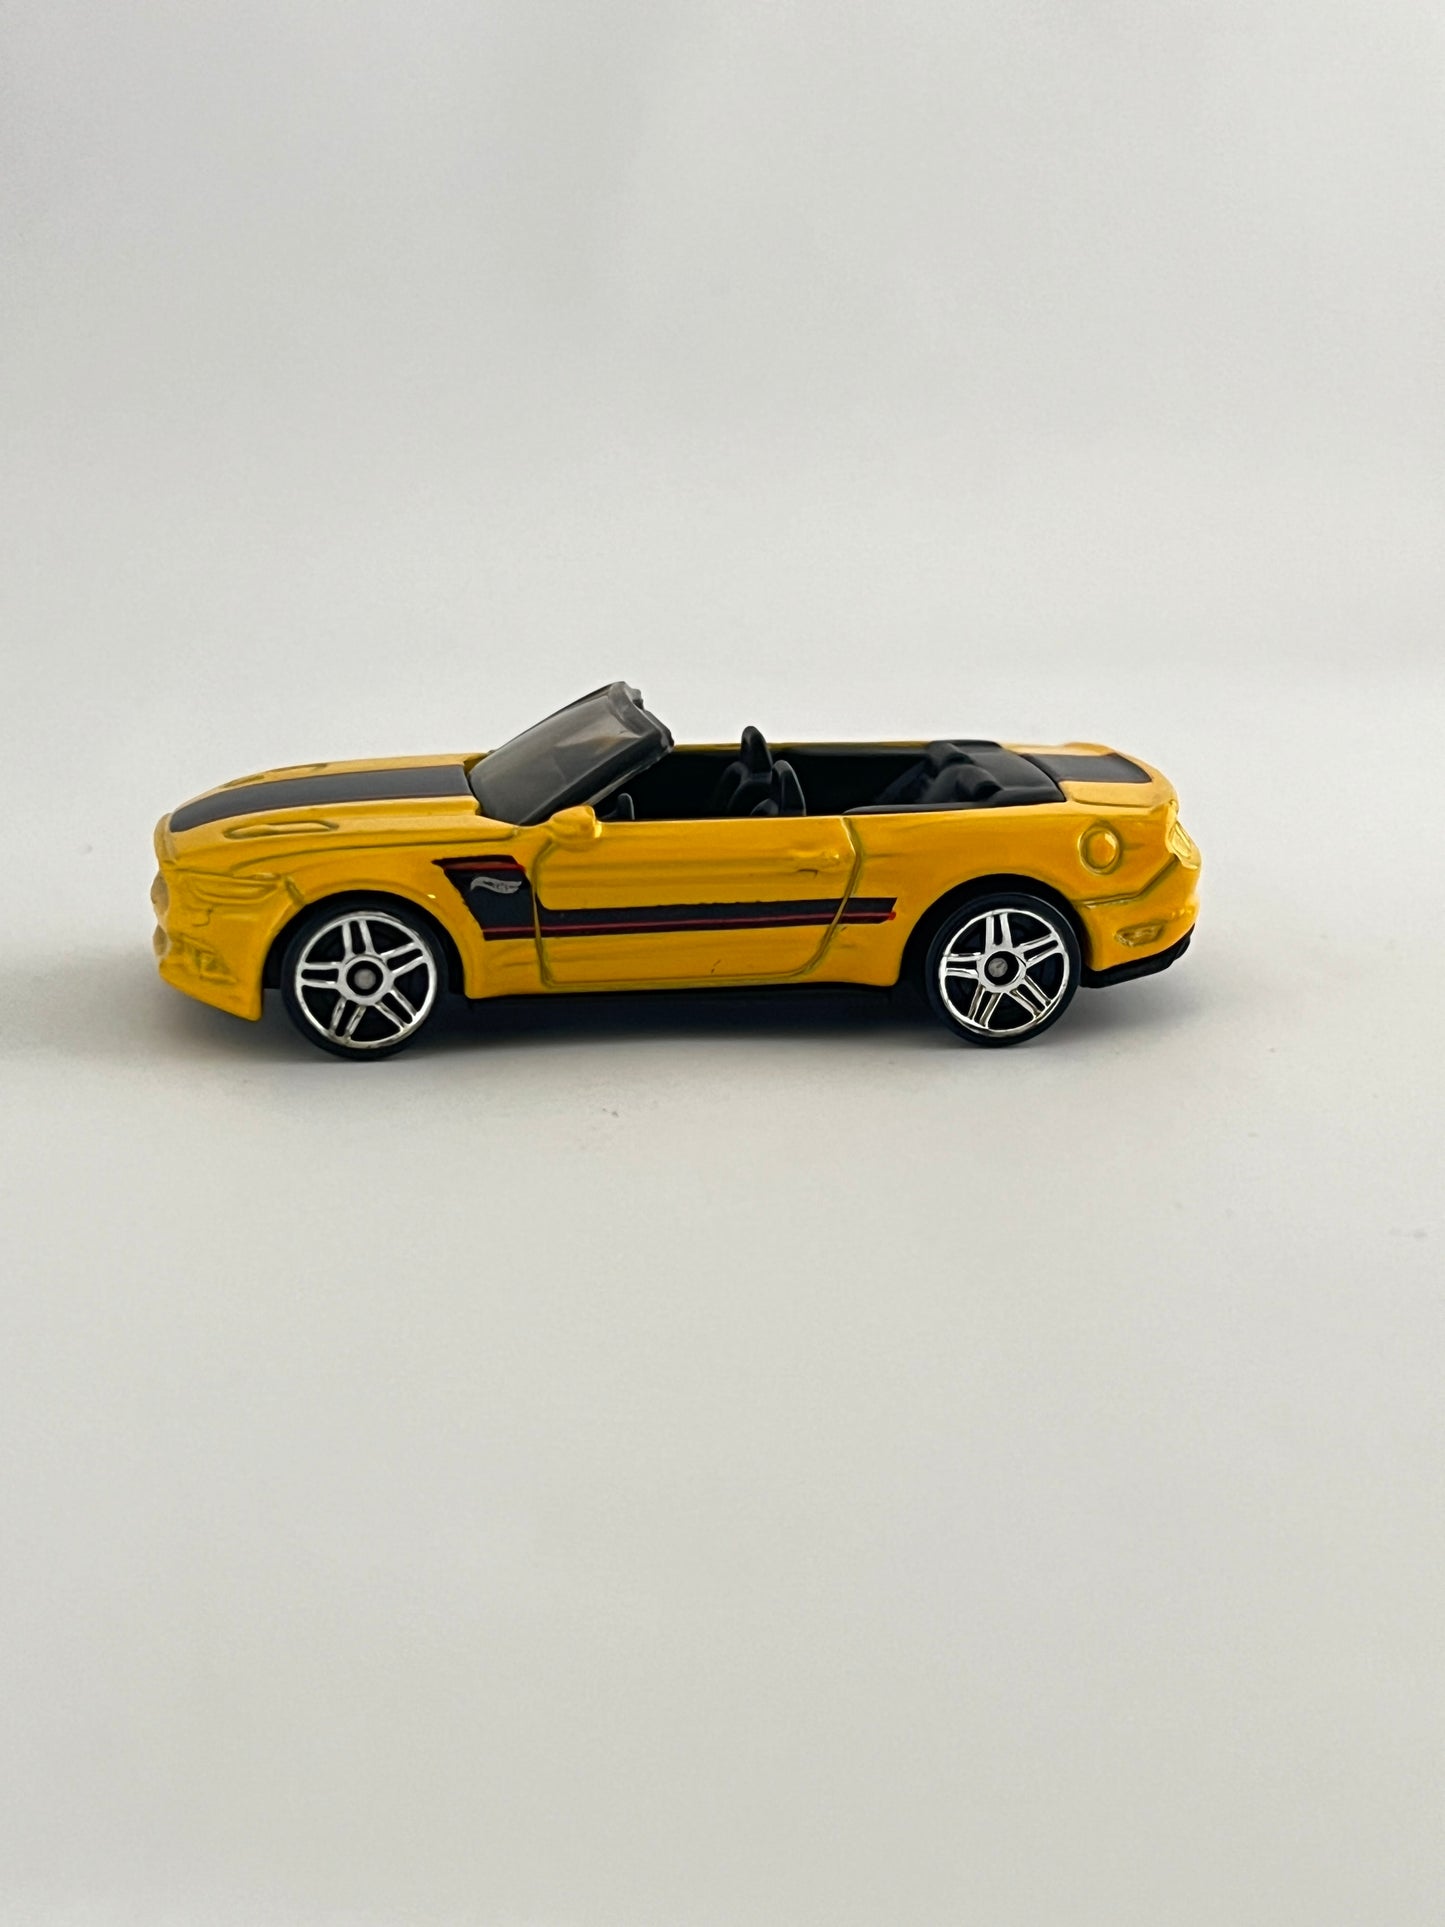 2015 FORD MUSTANG GT CONVERTIBLE - UNCARDED - MINT